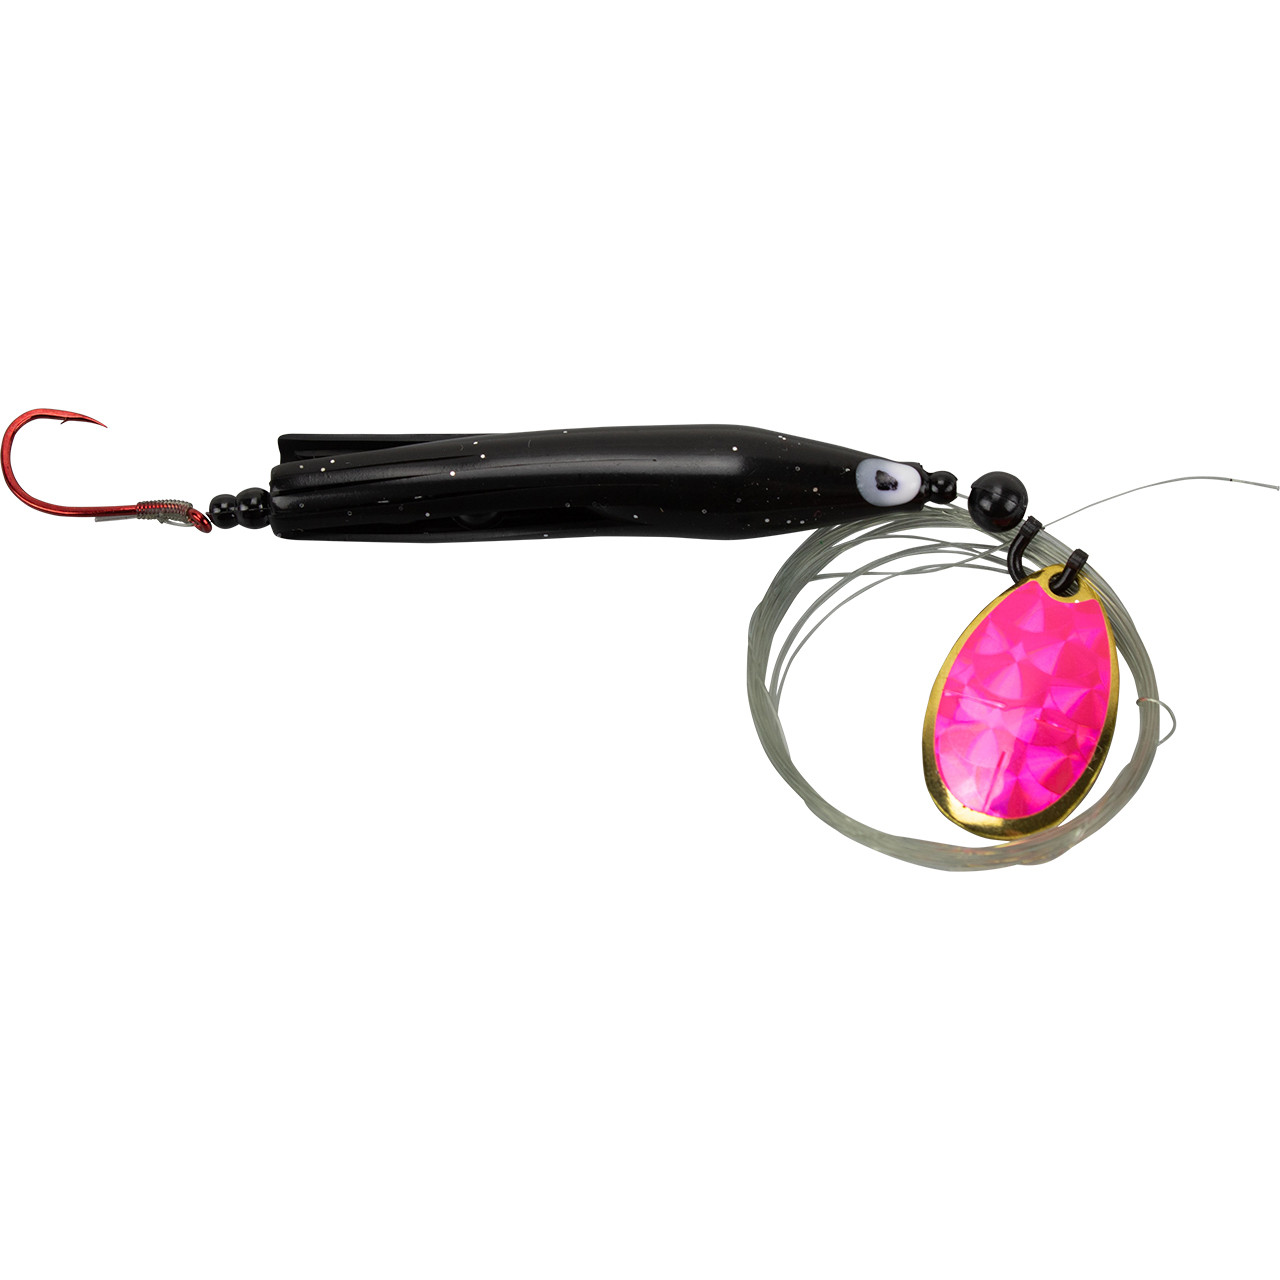 Wicked Lures Trout Killer - Black Purple